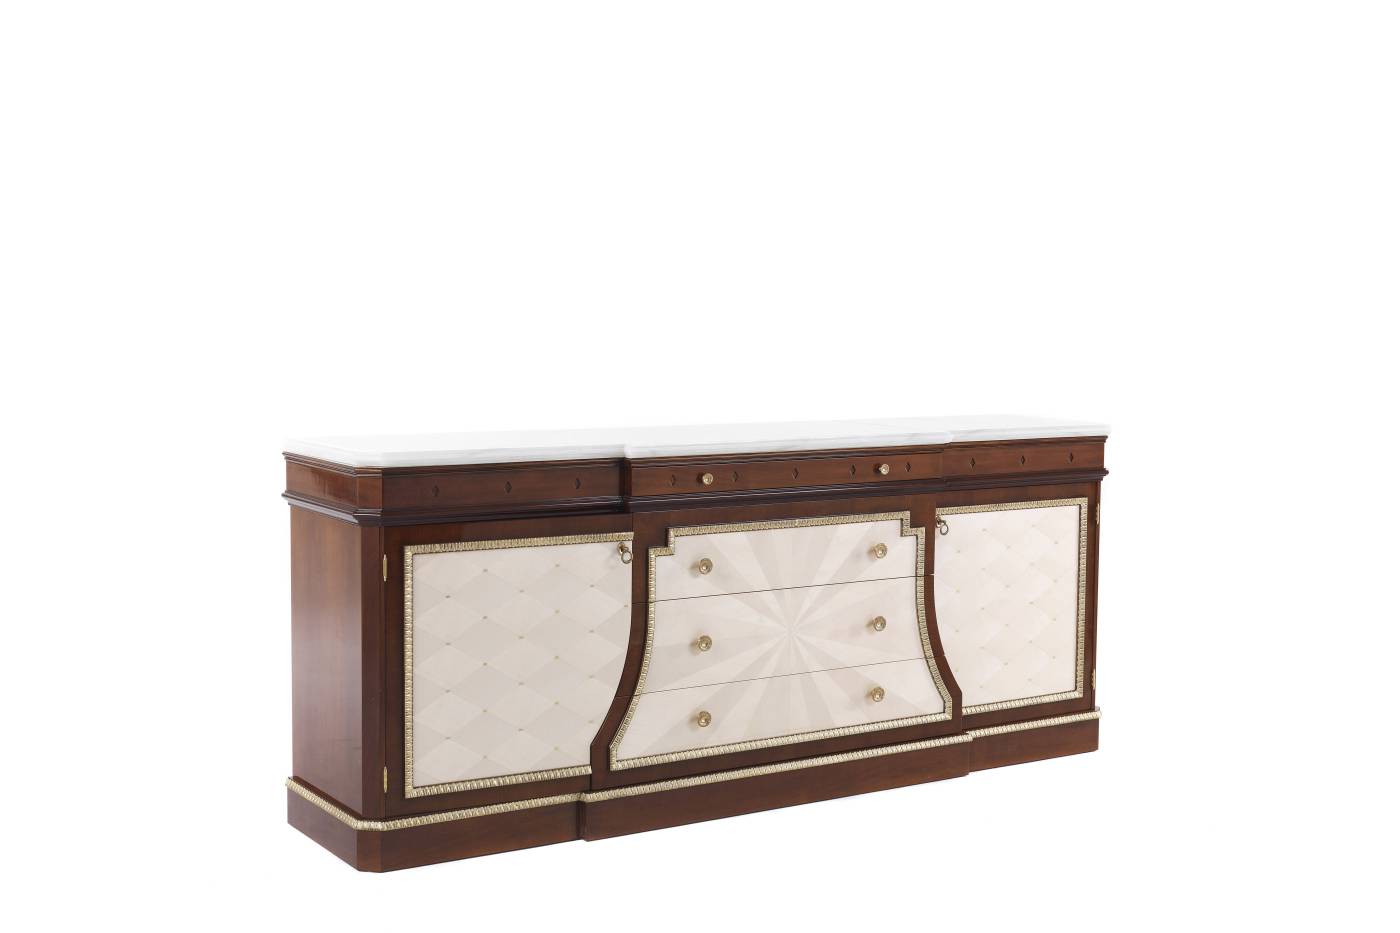 ETOILE sideboard - Bespoke projects with luxury Made in Italy classic furniture